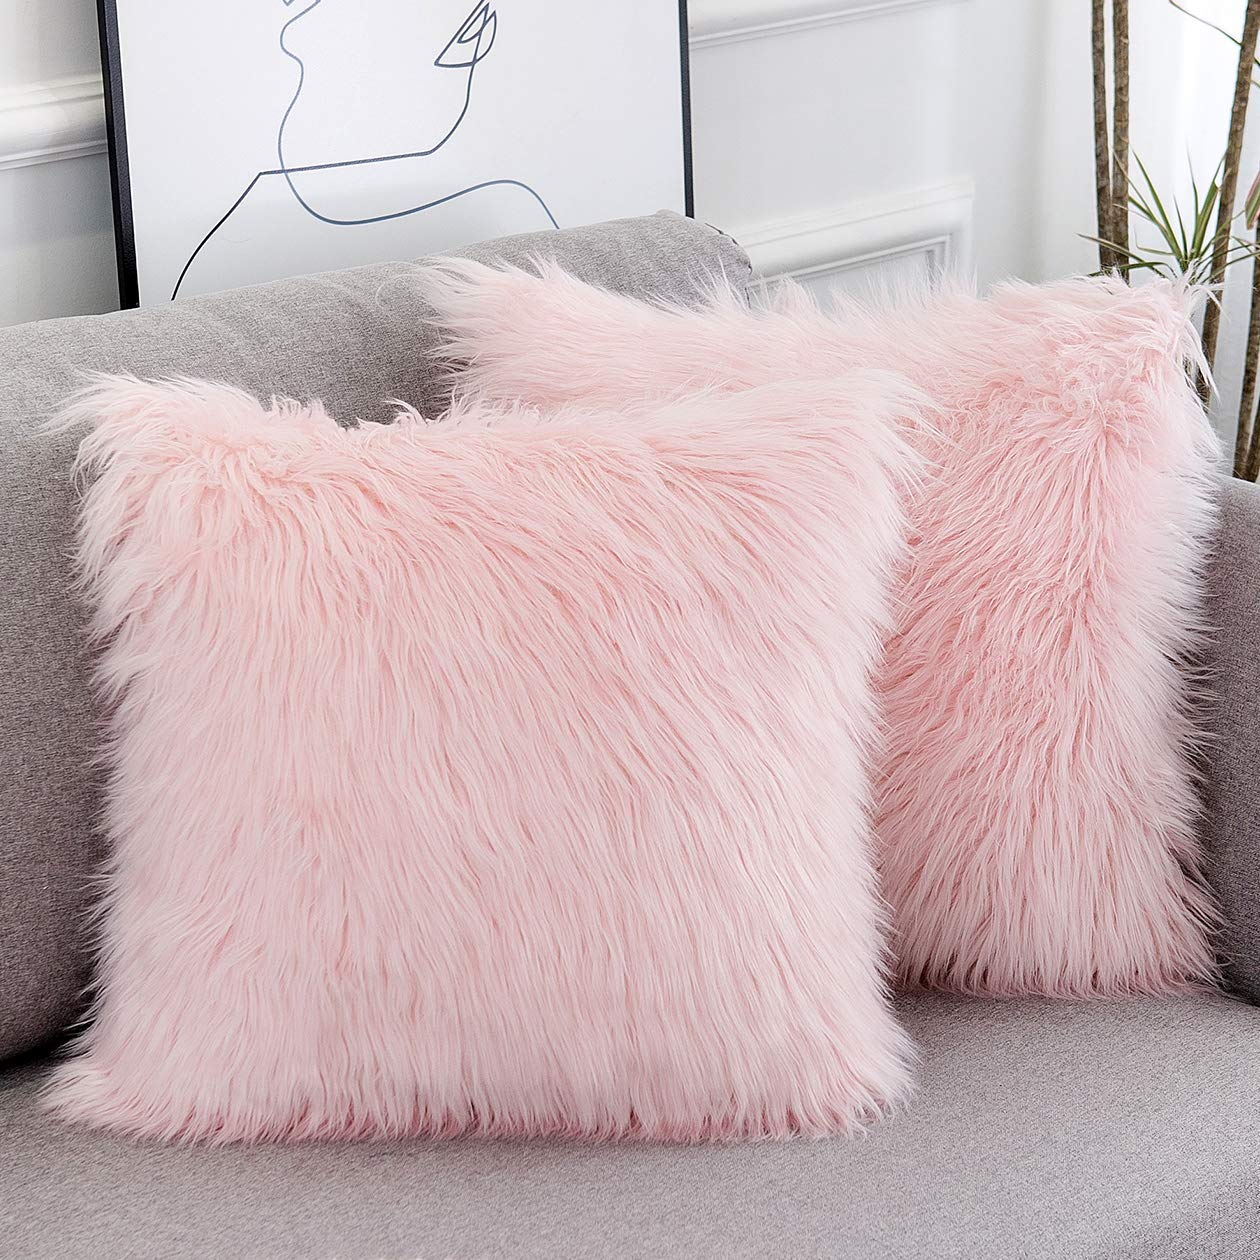 Pillow Fluffy Pillow Cover The Faux Fur Merino Style Square Fuzzy Decor Cushion Case